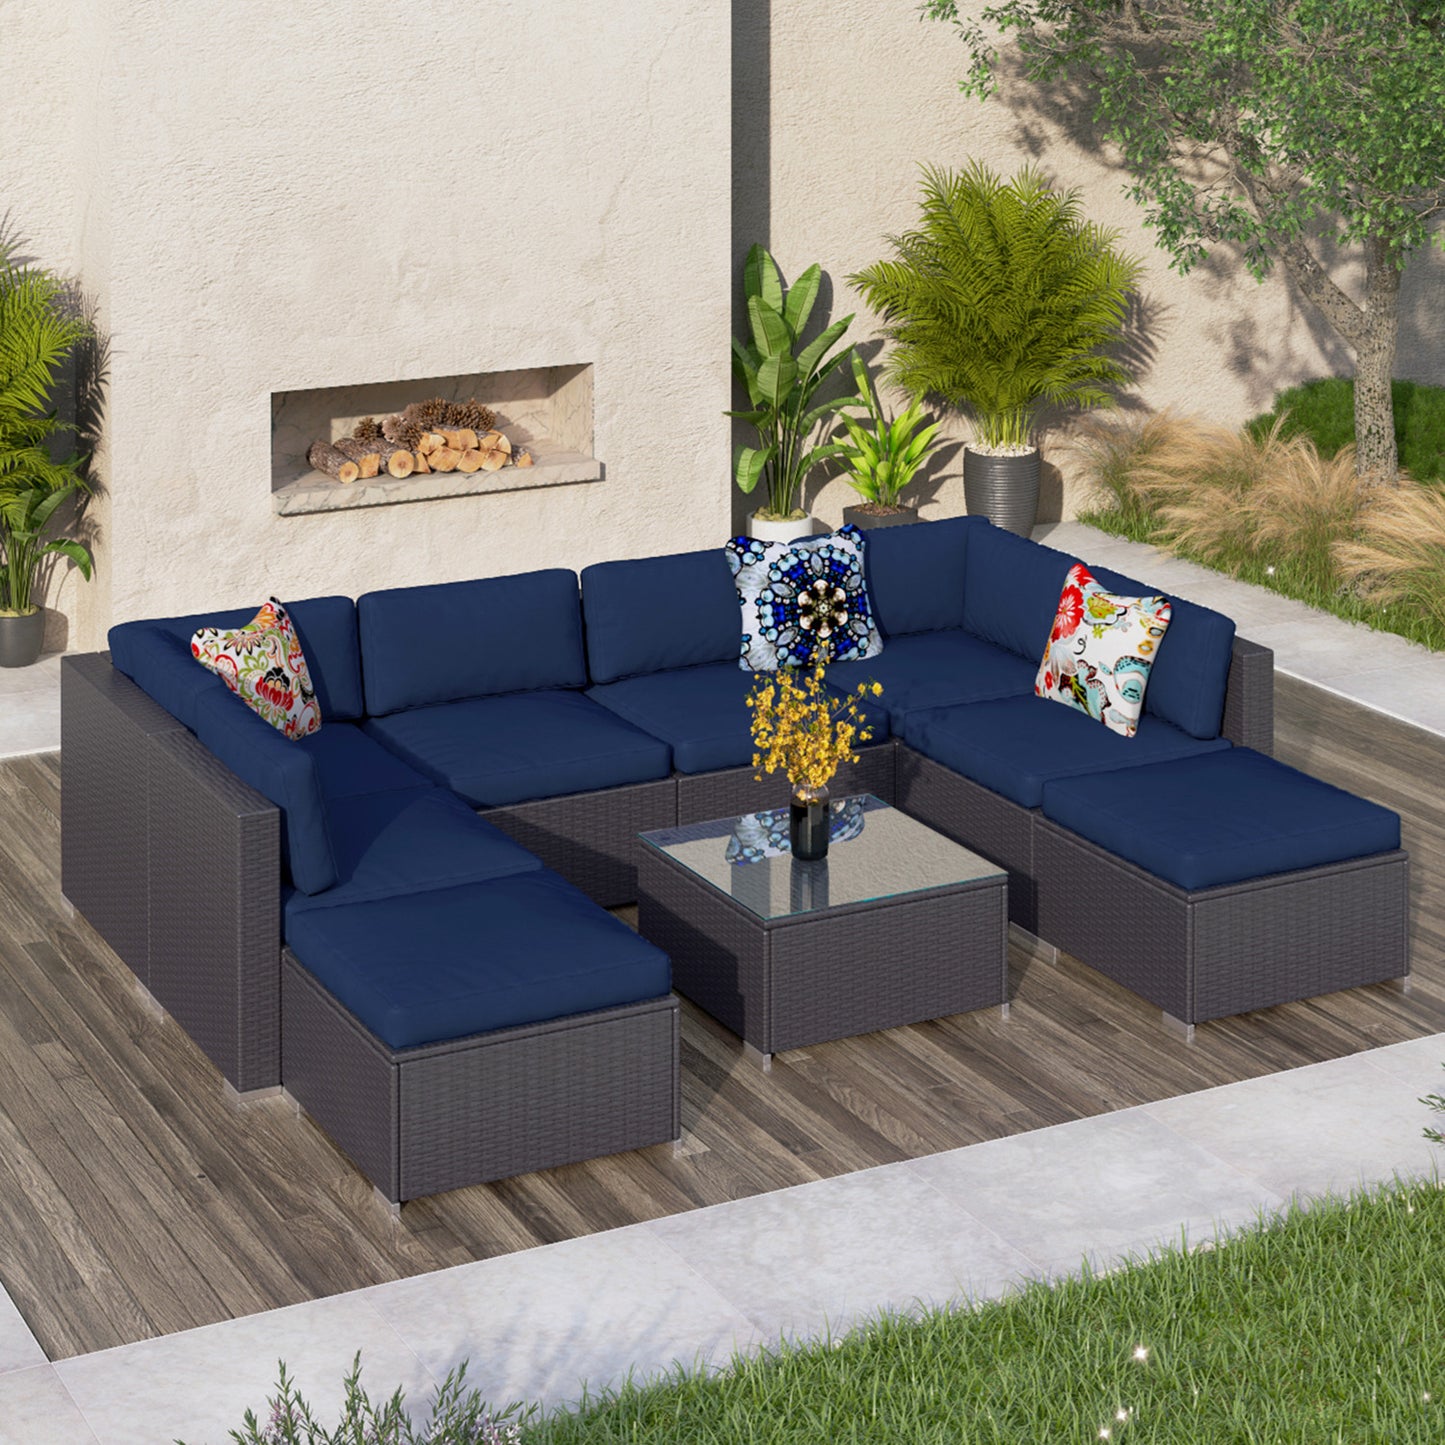 Sophia & William 9 Pieces Outdoor Patio Rattan Sectional Sofa Set, Wicker Rattan Patio Furniture Sofa Chairs Sets with Tea Table and Washable Couch Cushions, Navy Blue